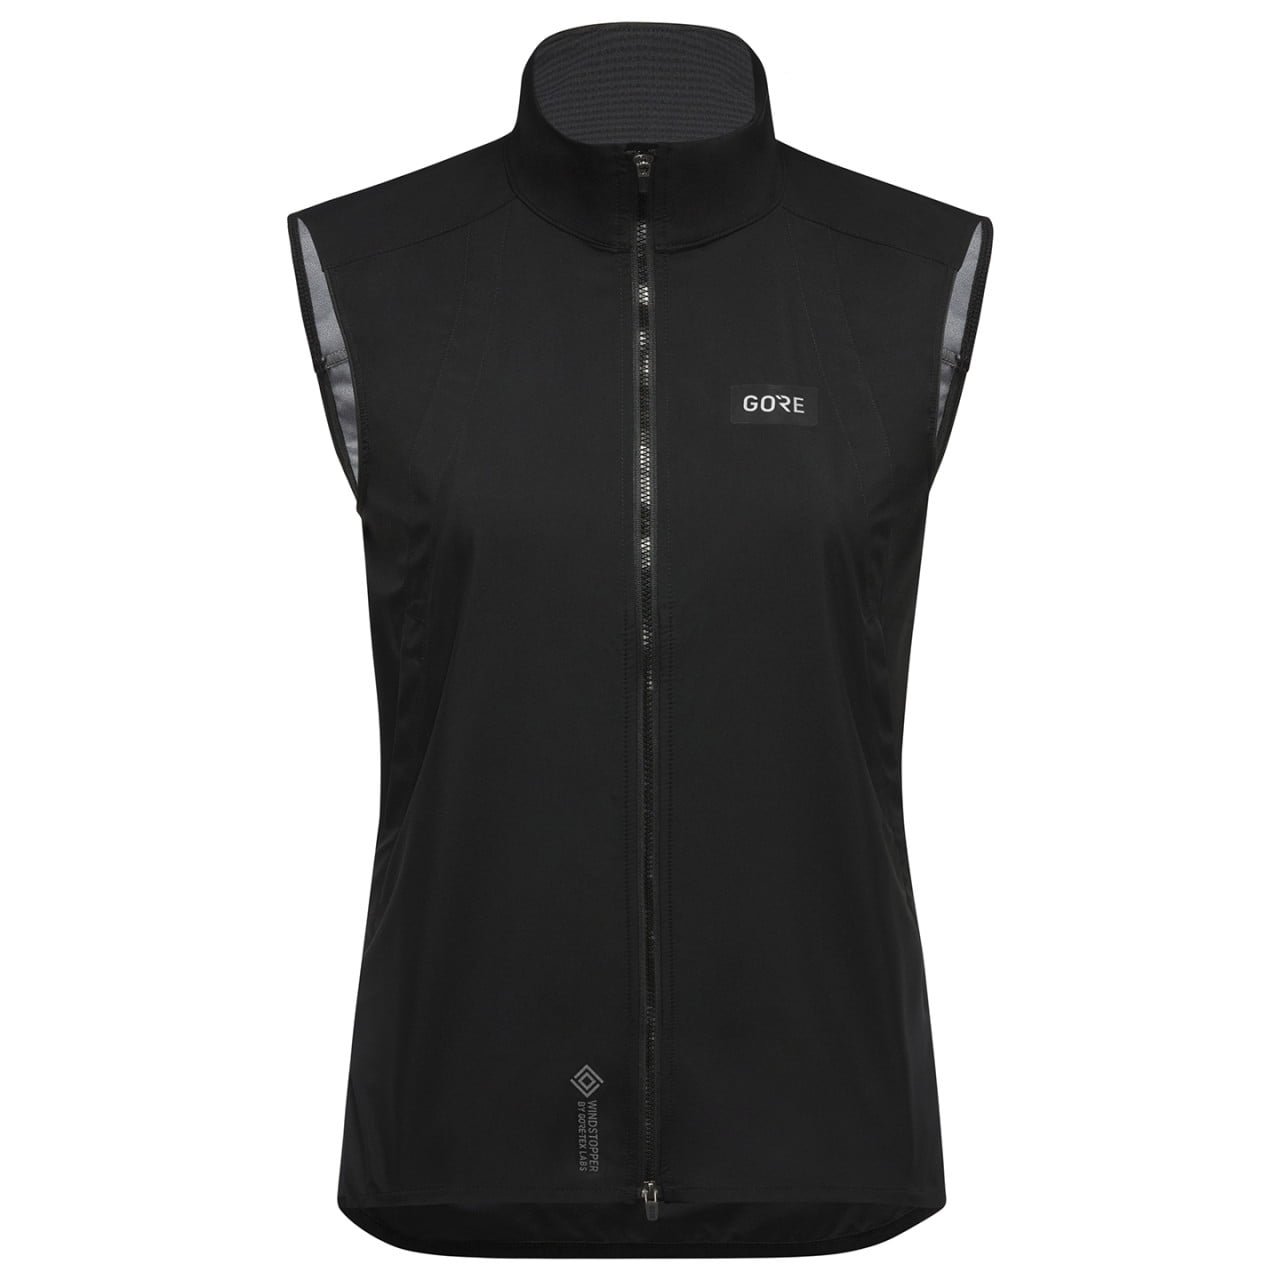 Everyday Women's Cycling vest